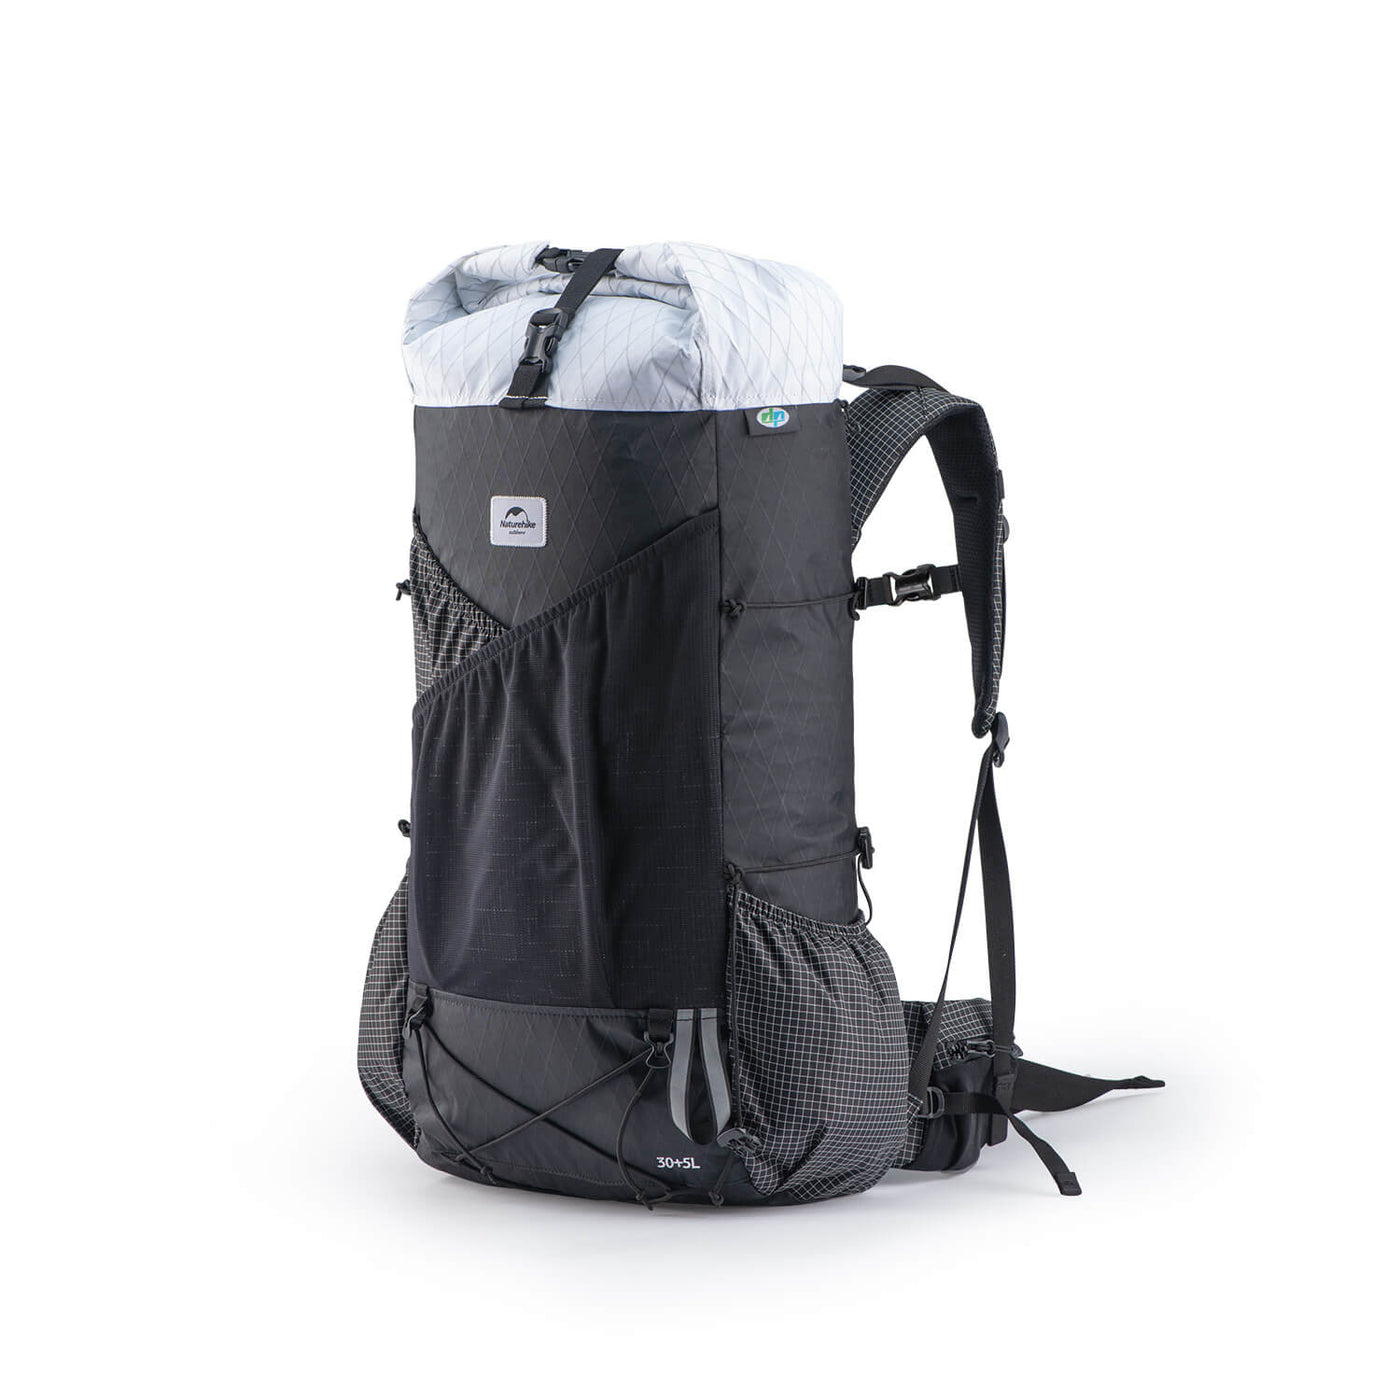 Waterproof hiking bag with support 30L + 5L